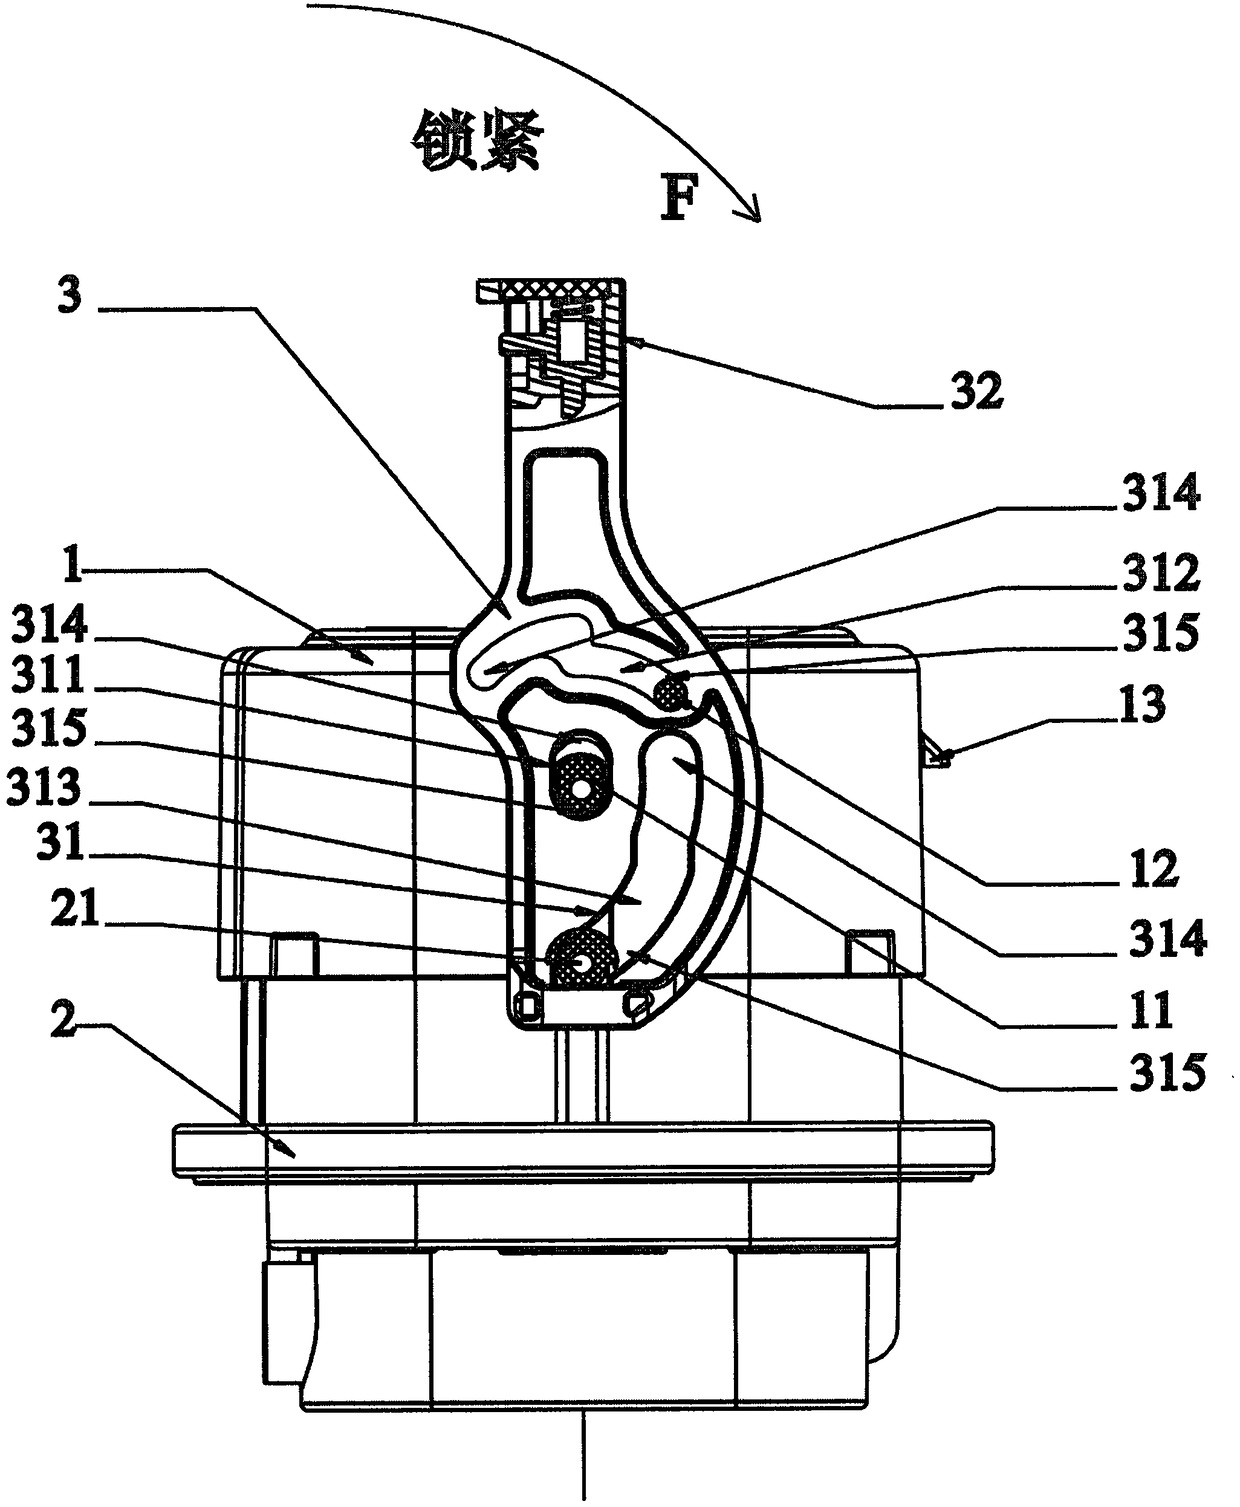 A step-by-step locking device for electric vehicle connector plug